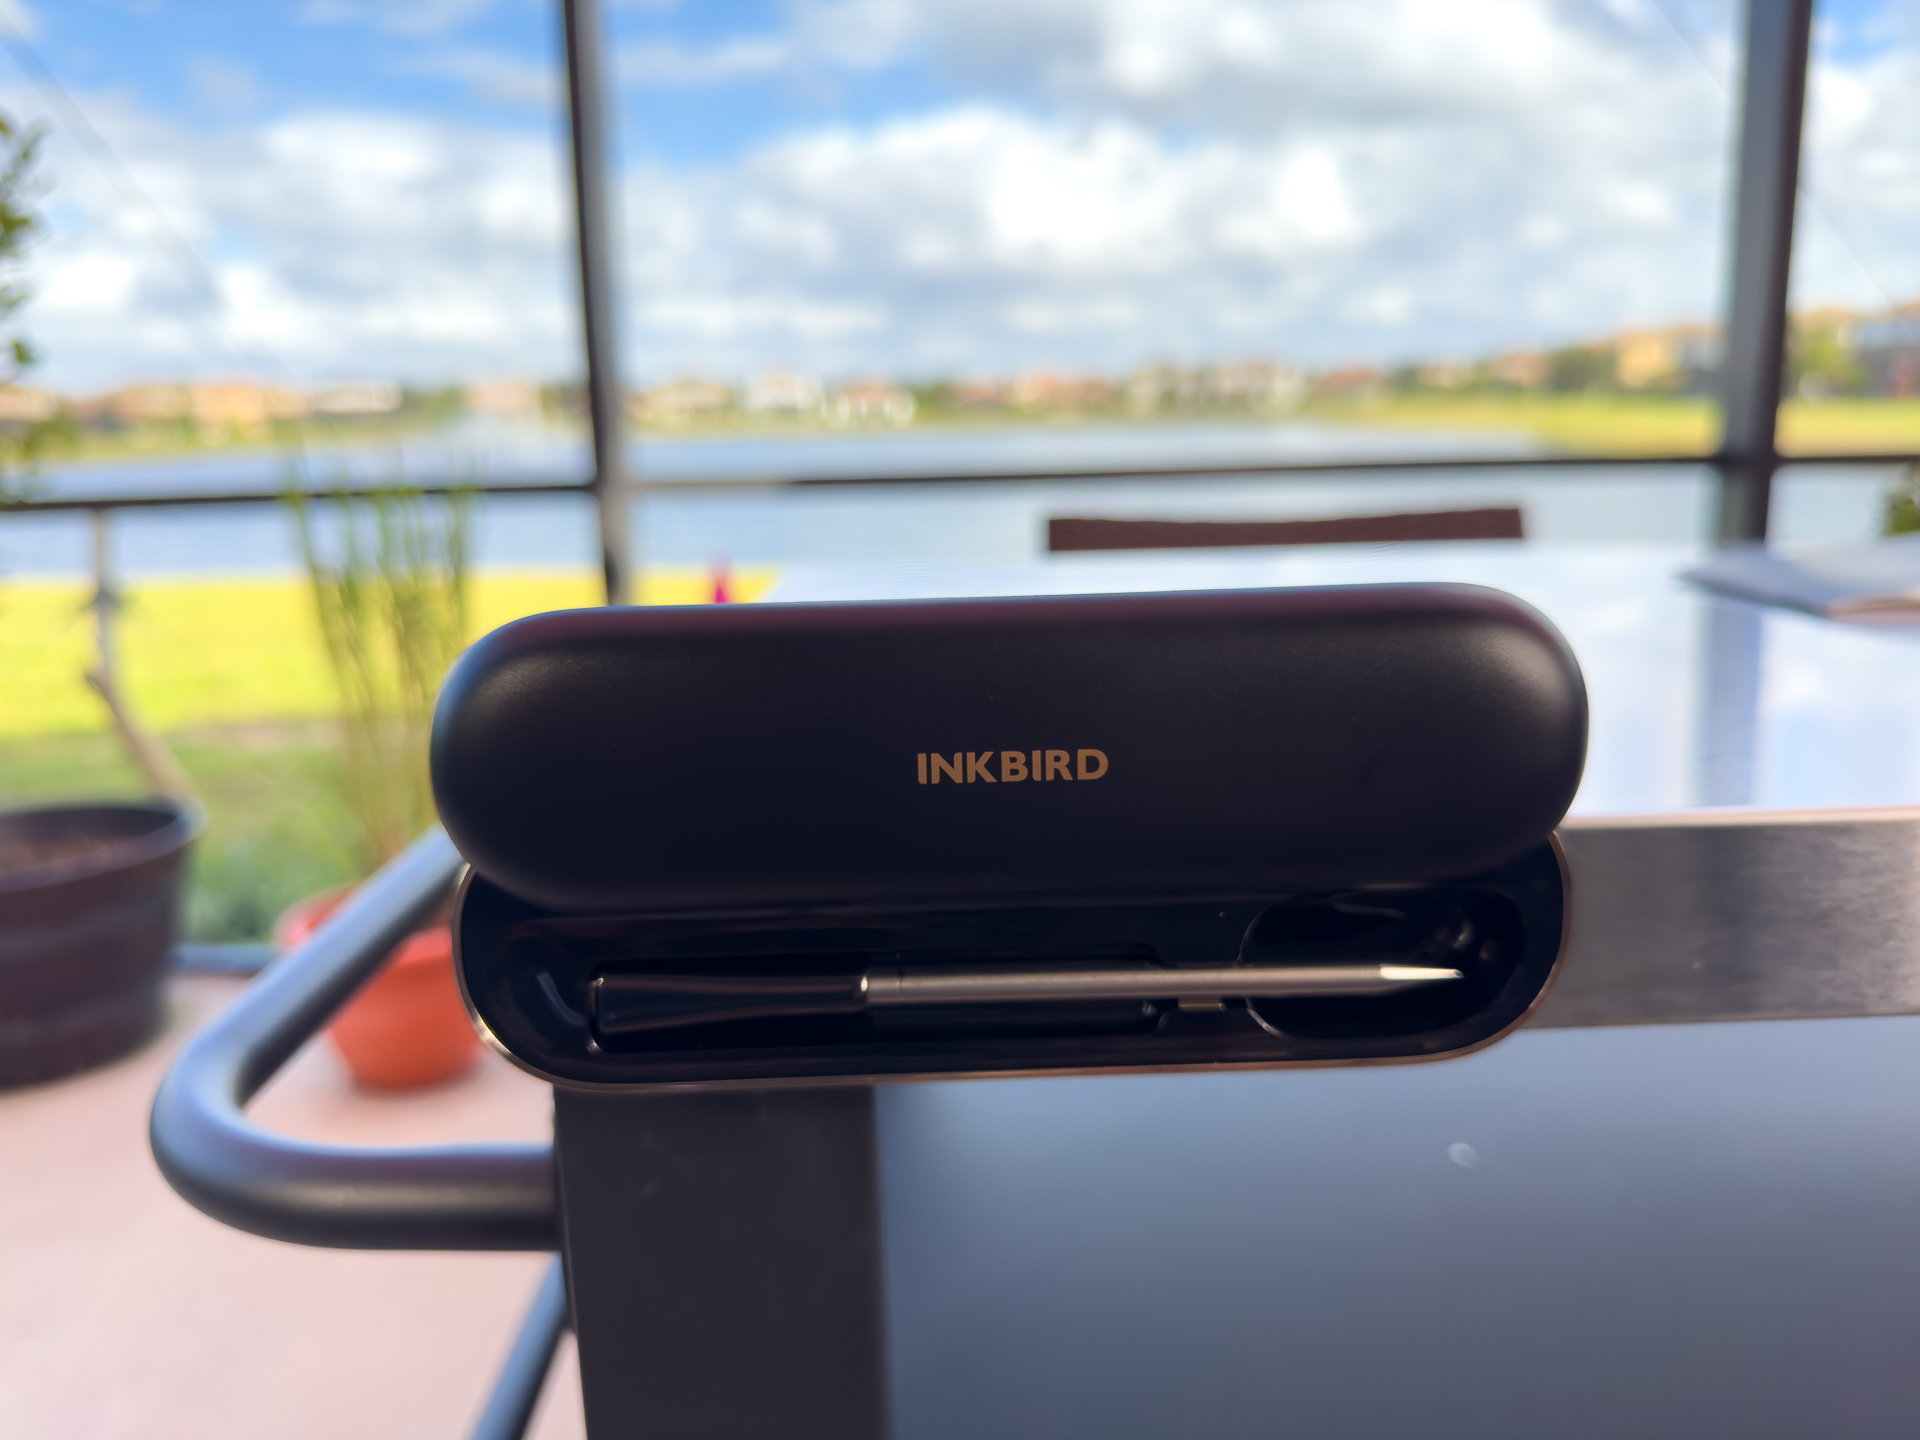 The INKBIRD INT-11P-B Wireless Thermometer probe inside its charging case magnetically attached to a BBQ cart.